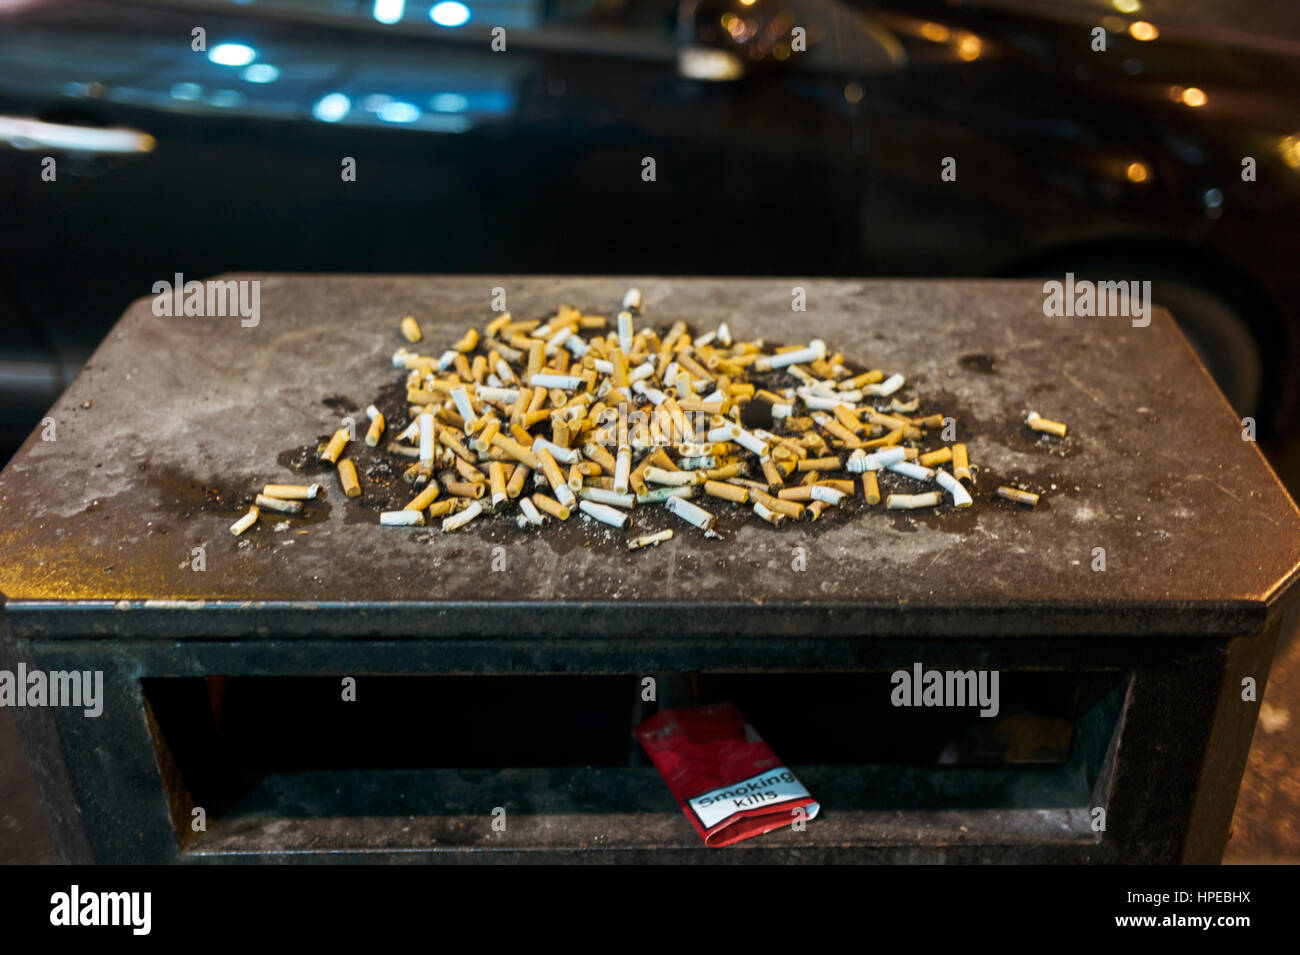 Cigarette ends on bin in Glasgow at night Stock Photo